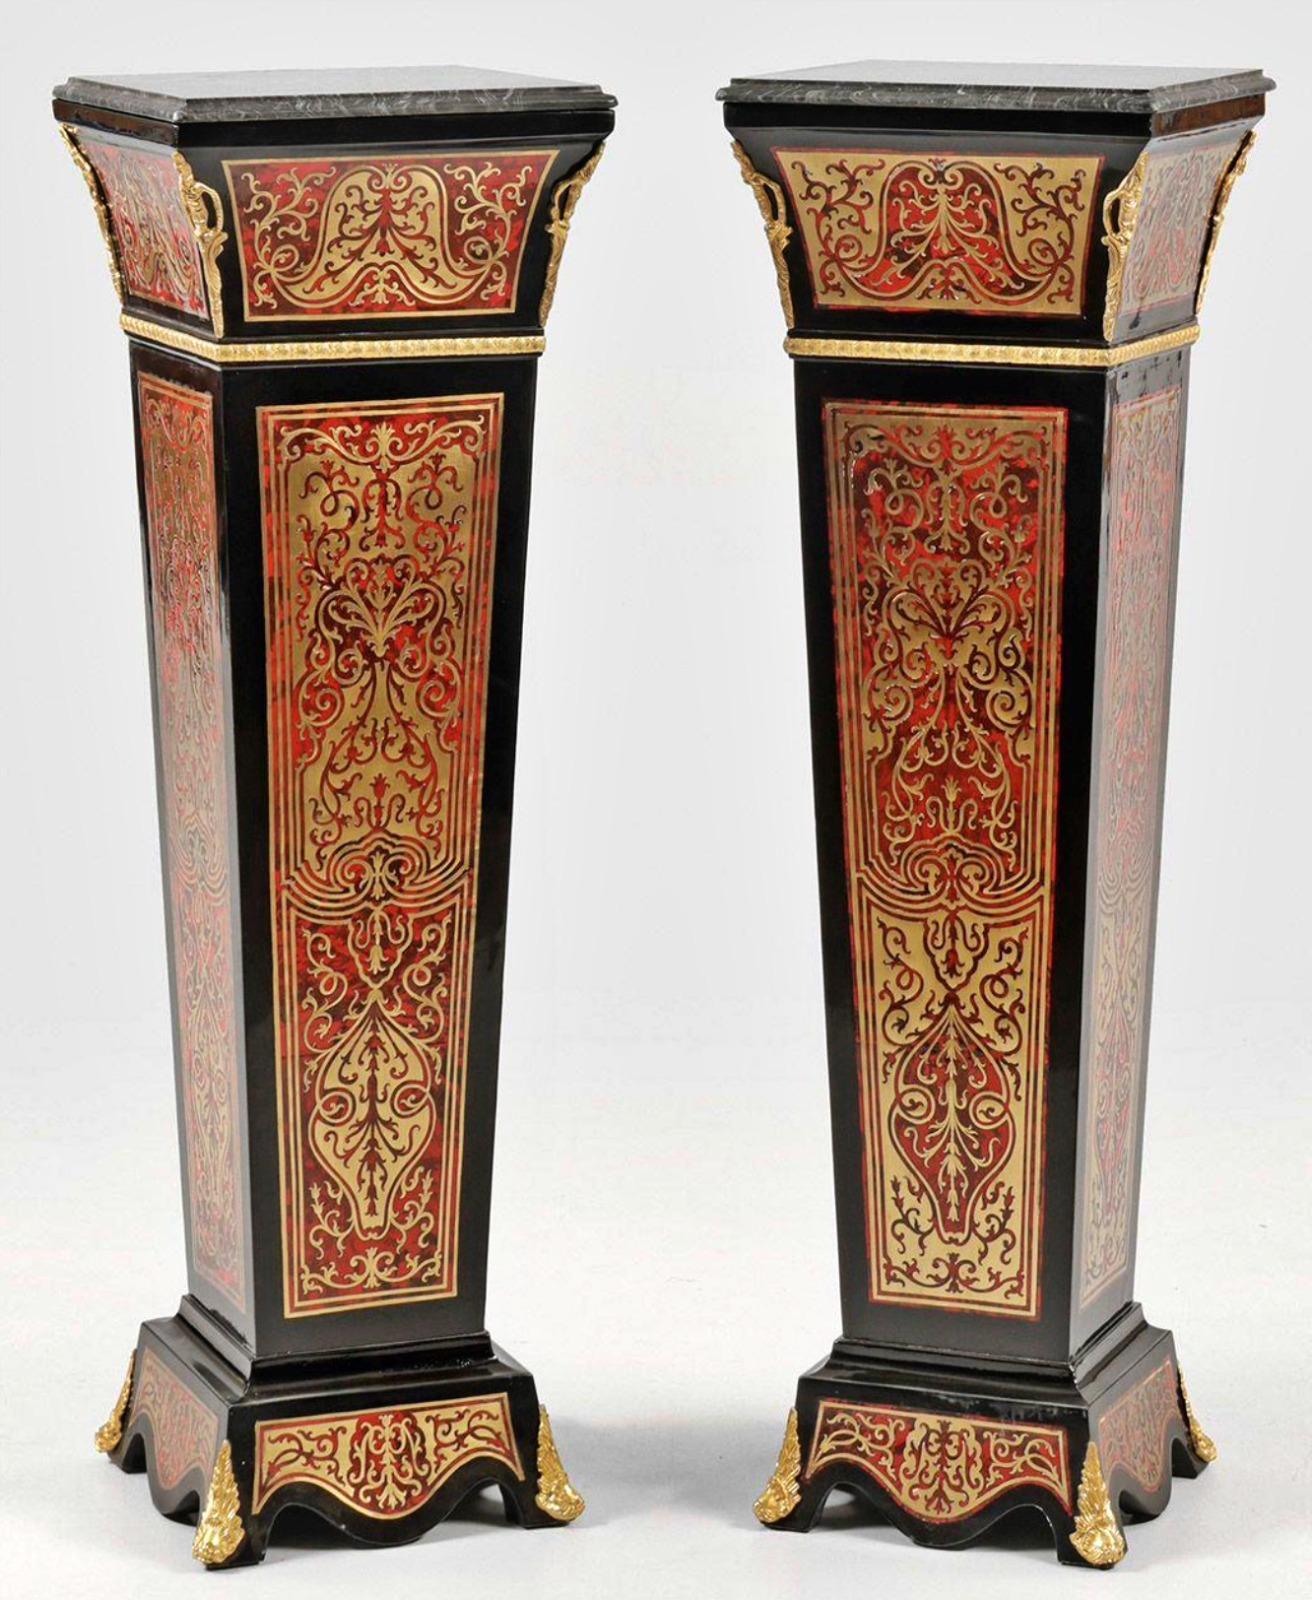 Hand-Crafted Pair of Large Boulle-Style Pedestals 19th Century Napoleon III